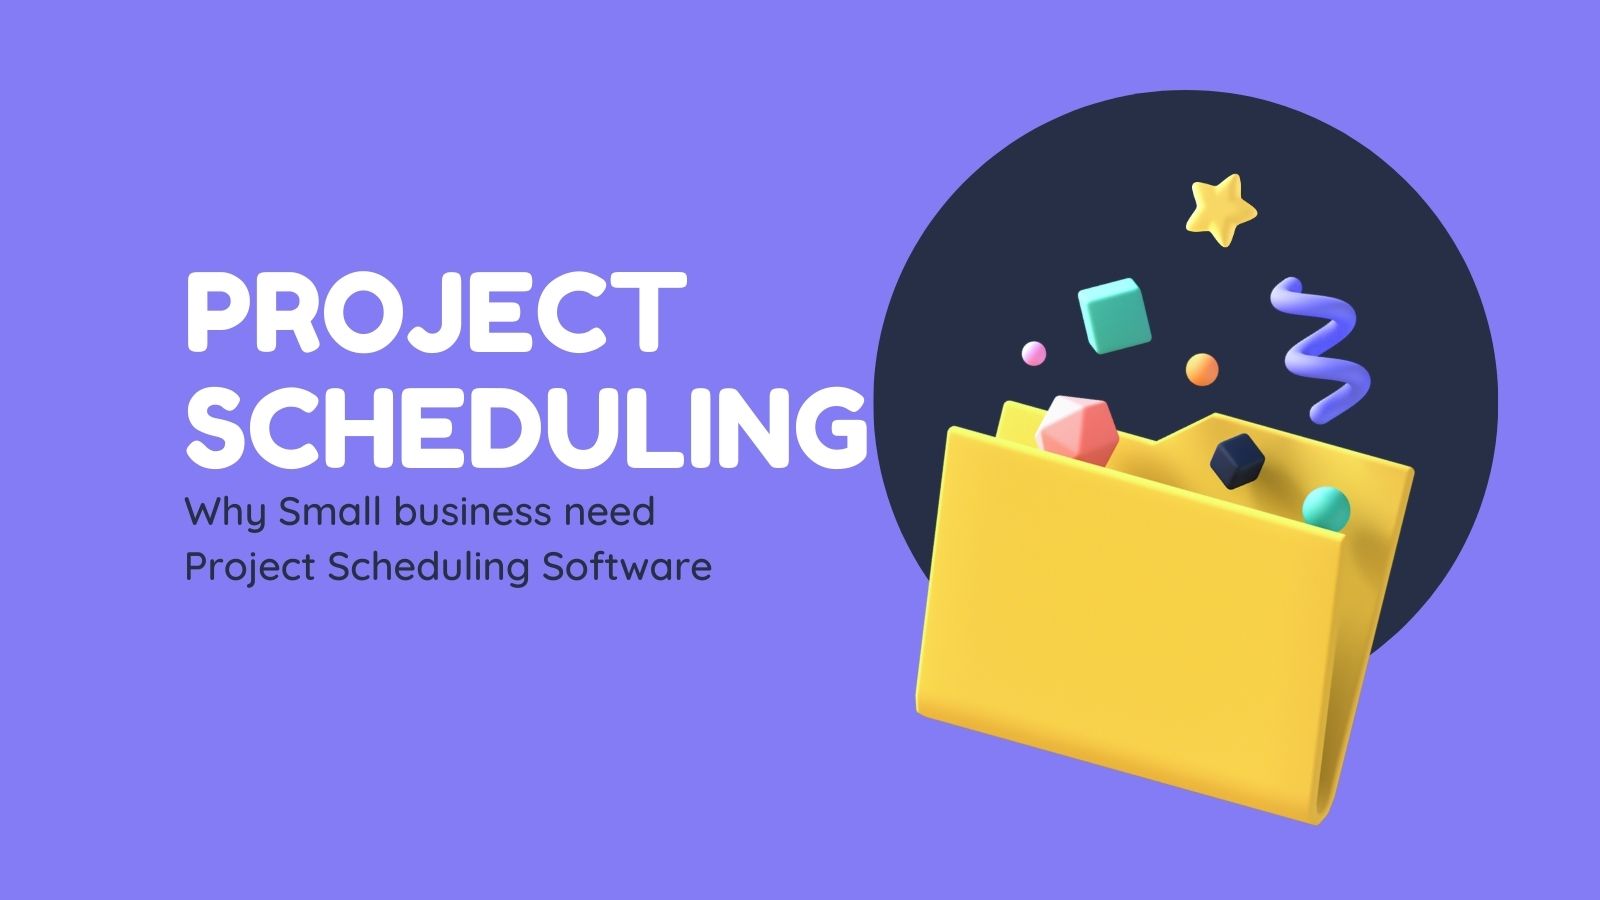 Why Small business need Project Scheduling Software